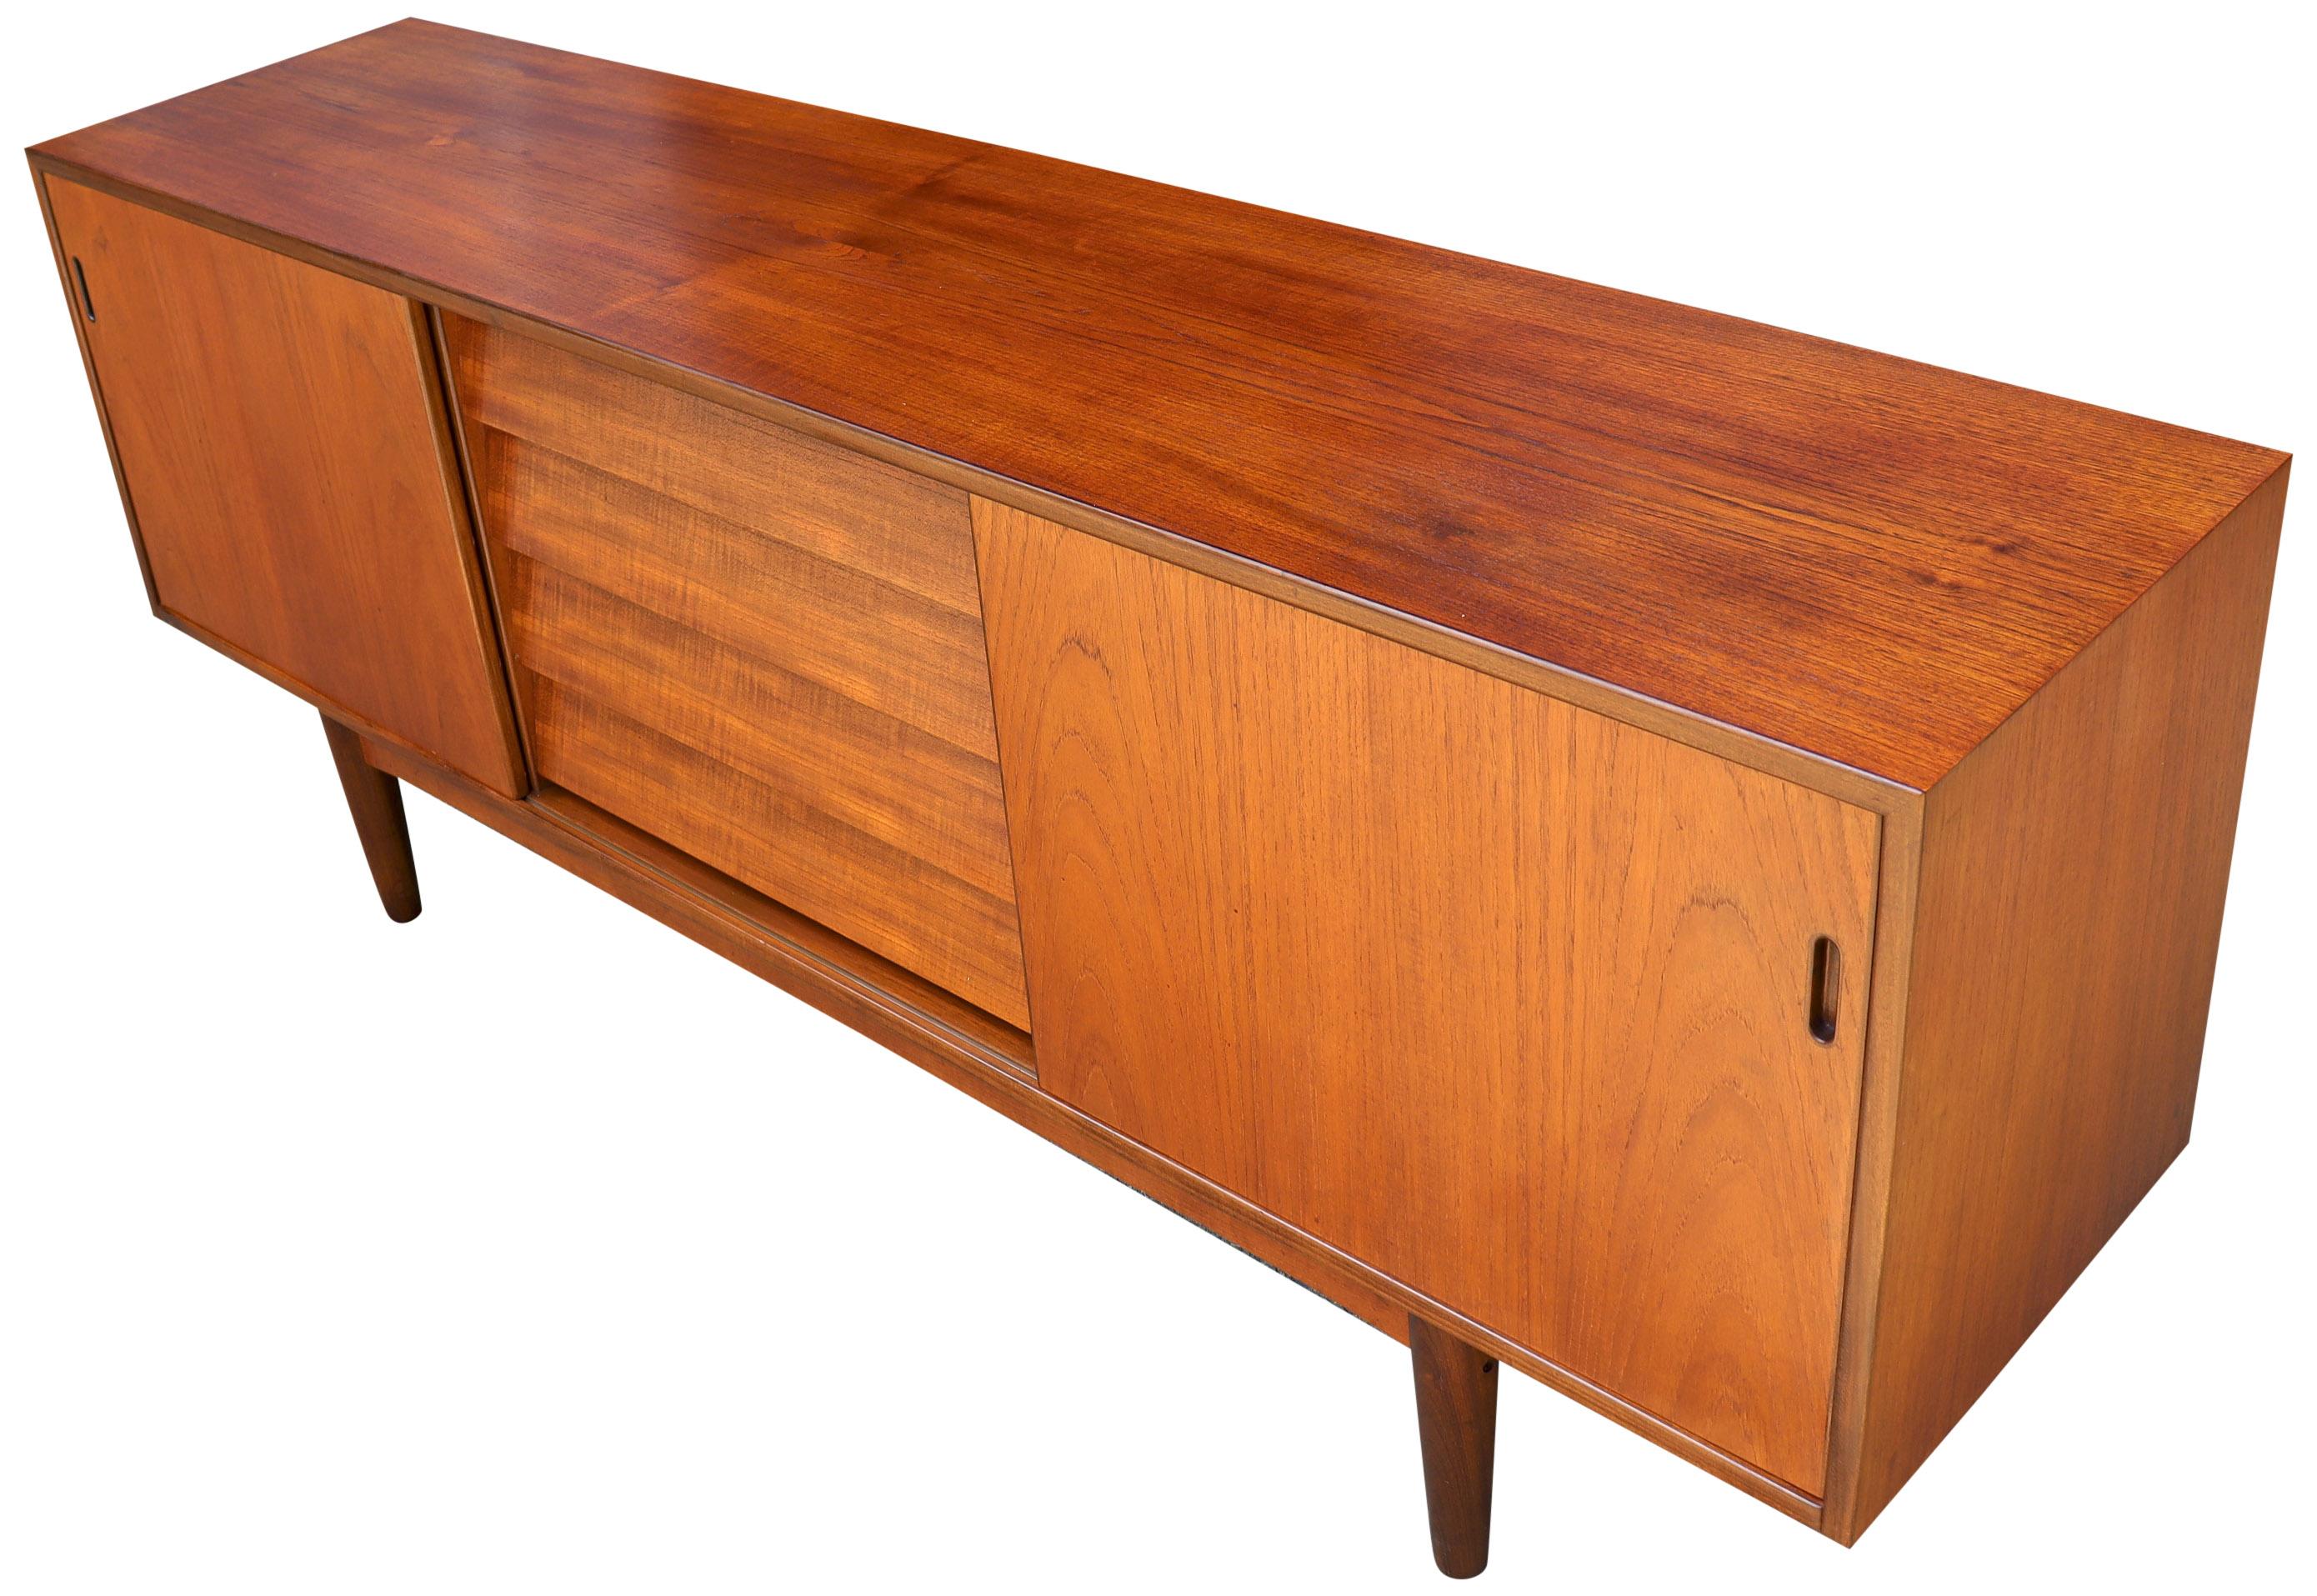 Beautiful Danish modern teak wood credenza or console featuring center louvered drawers and shelves hidden by sliding doors on either side. Exceptional finished back allows placement anywhere in your space. Each cabinet section is 24'' width.